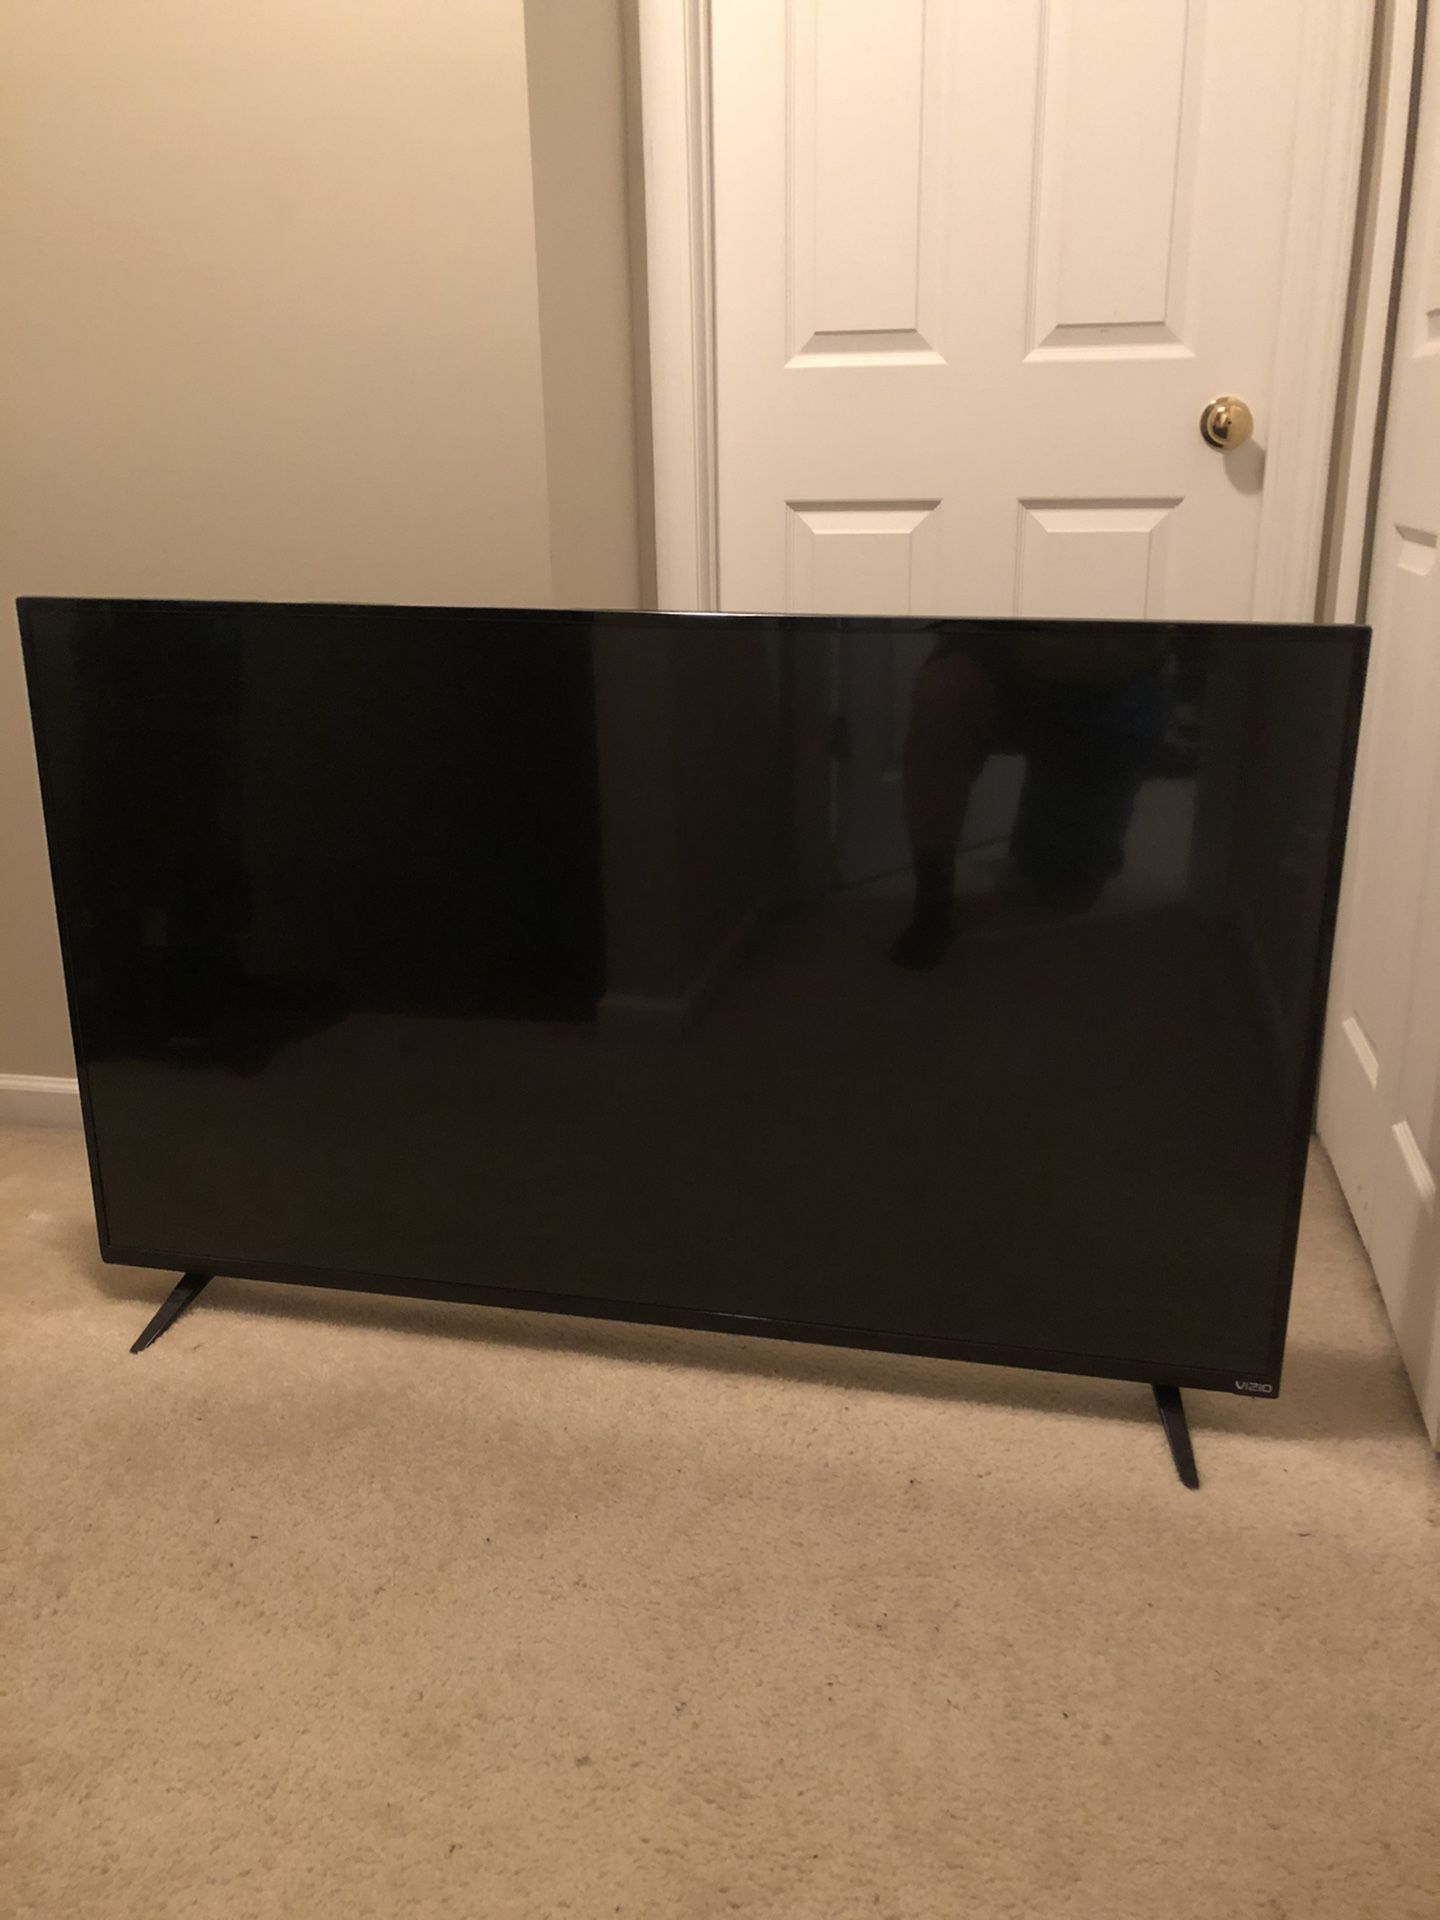 Vizio 55 and 32 inch TVs with remotes (both included)